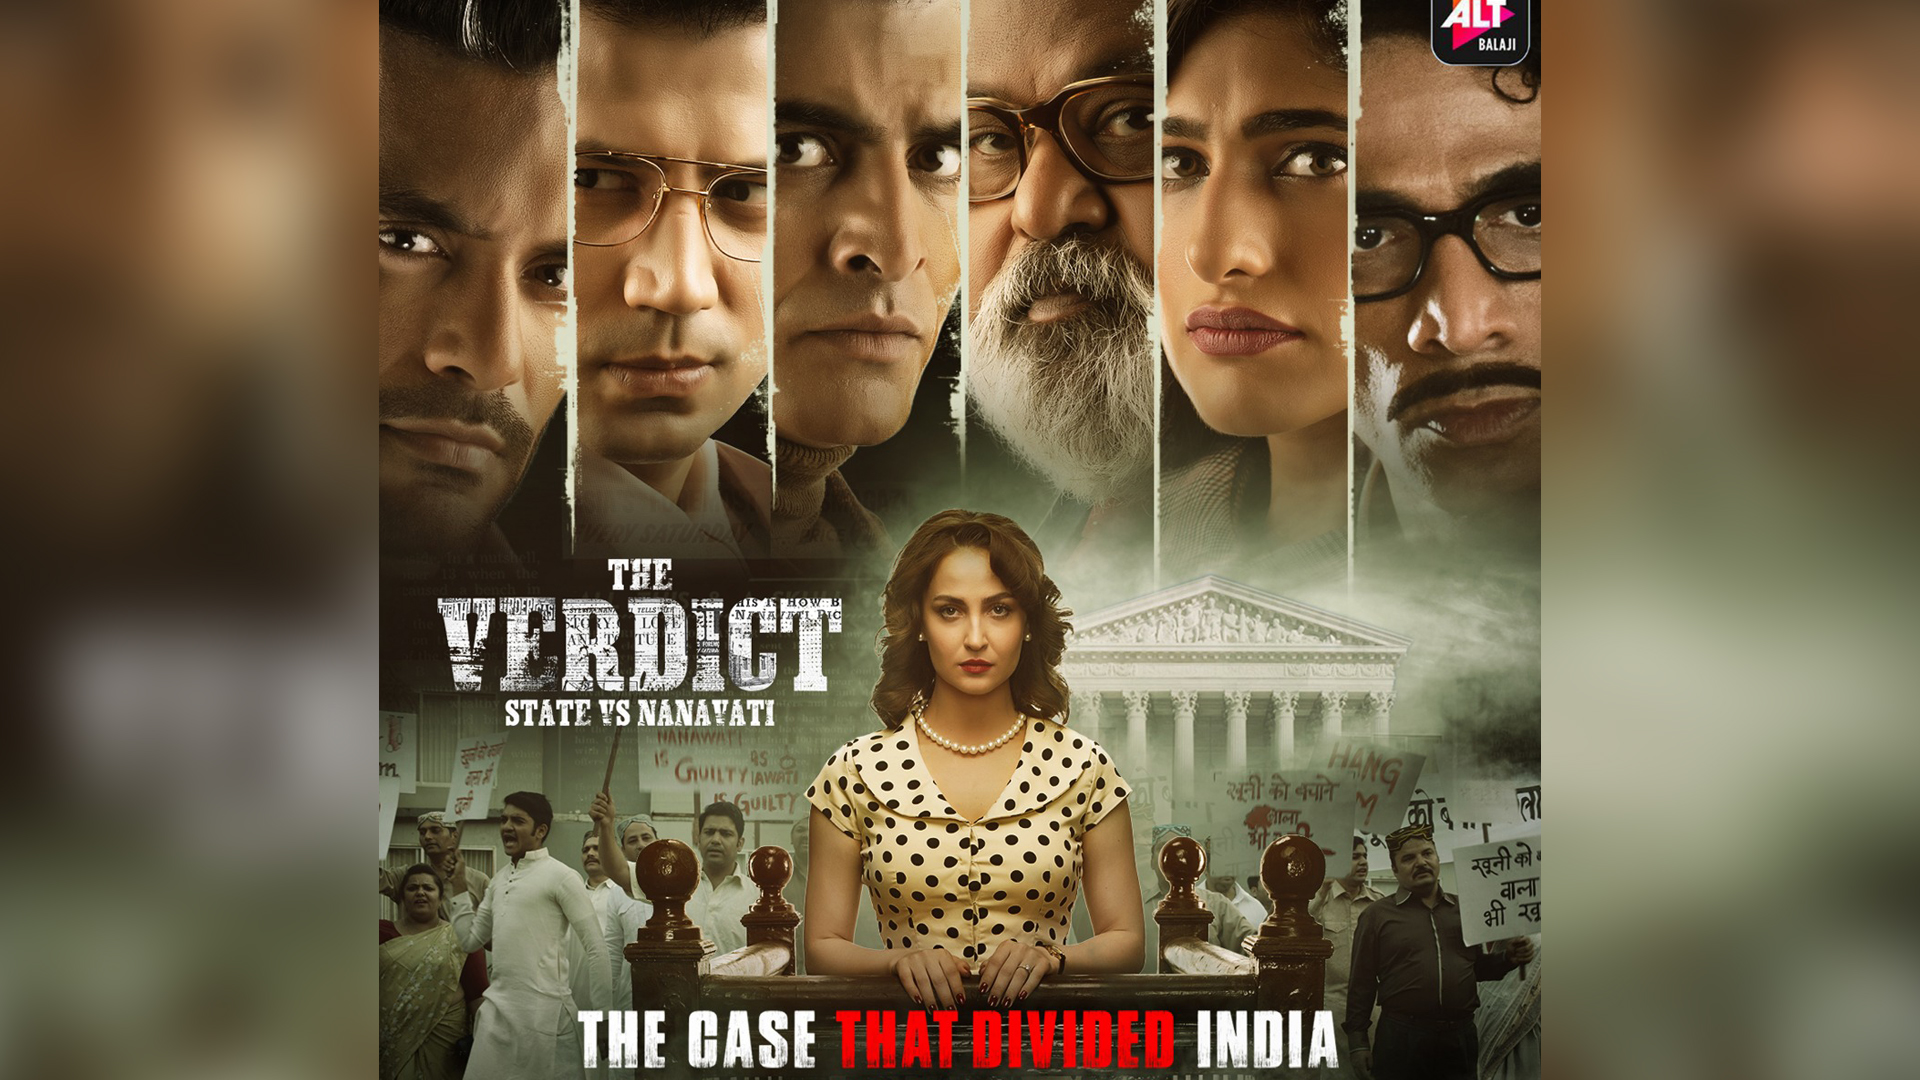 ALTBalaji’s ‘The Verdict – State Vs Nanavati’ unveiled new posters earlier and the hype for the most awaited courtroom drama continues!